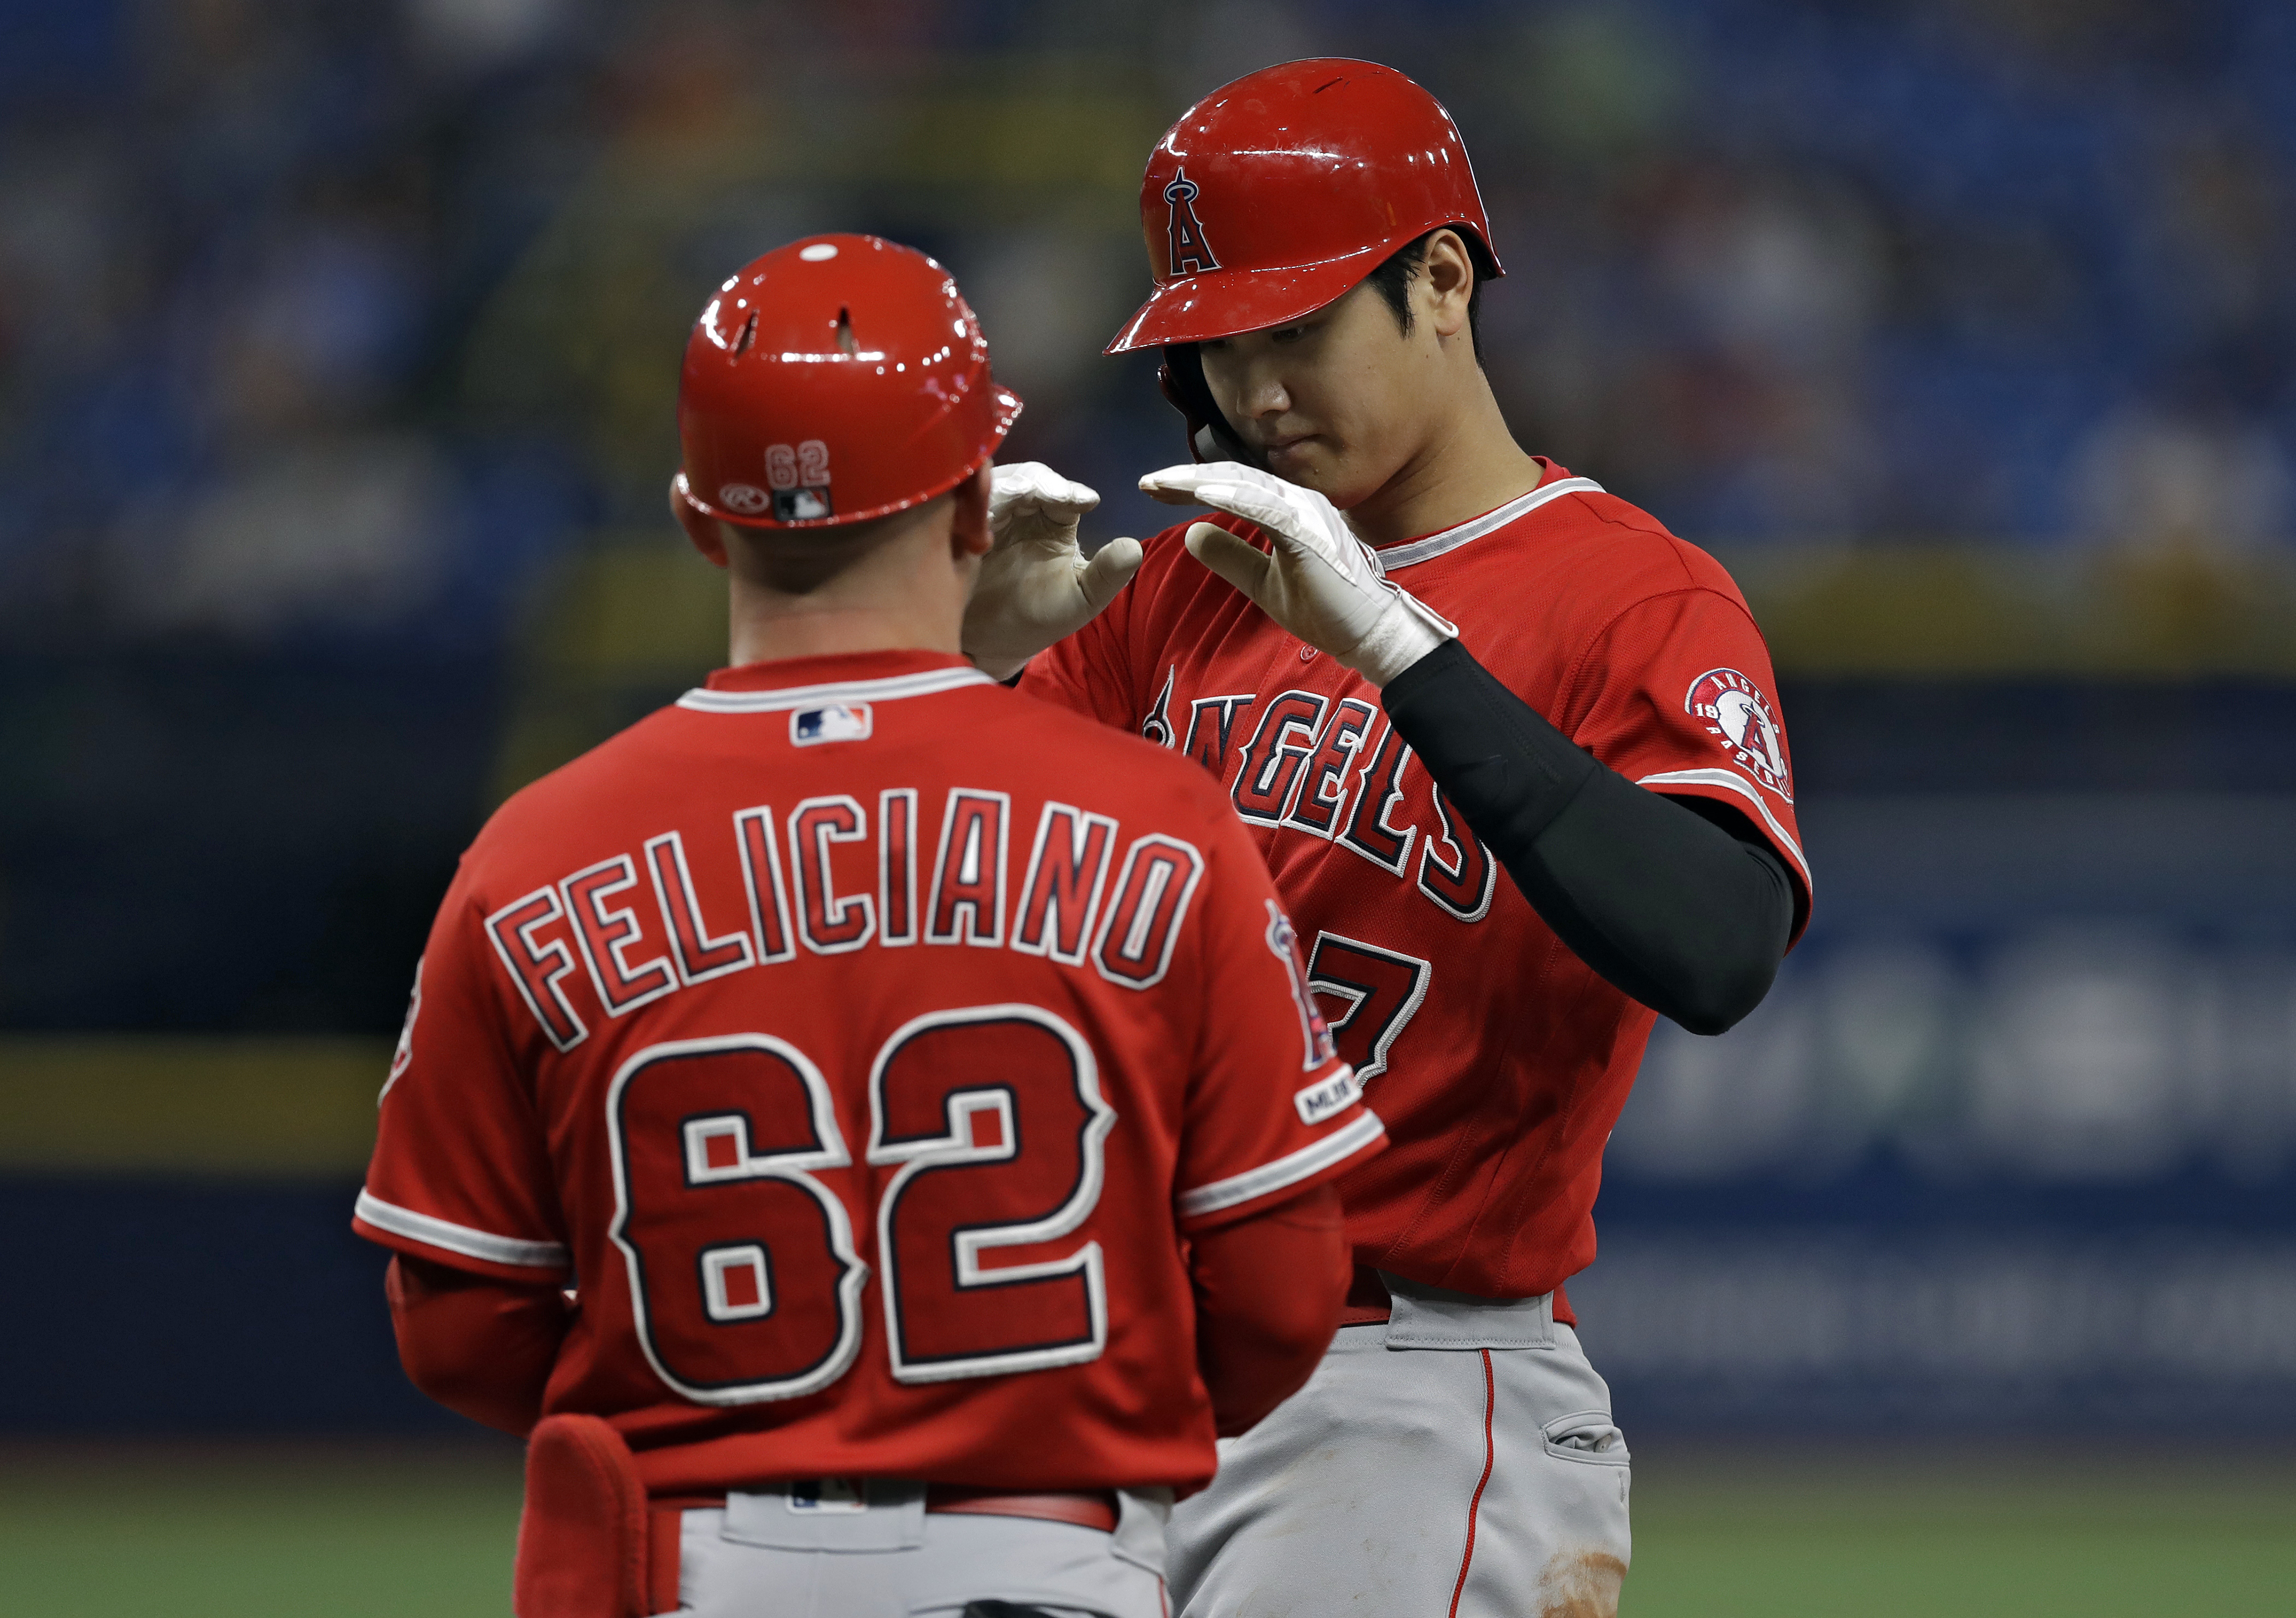 Angels' Ohtani first Japanese player to hit for cycle